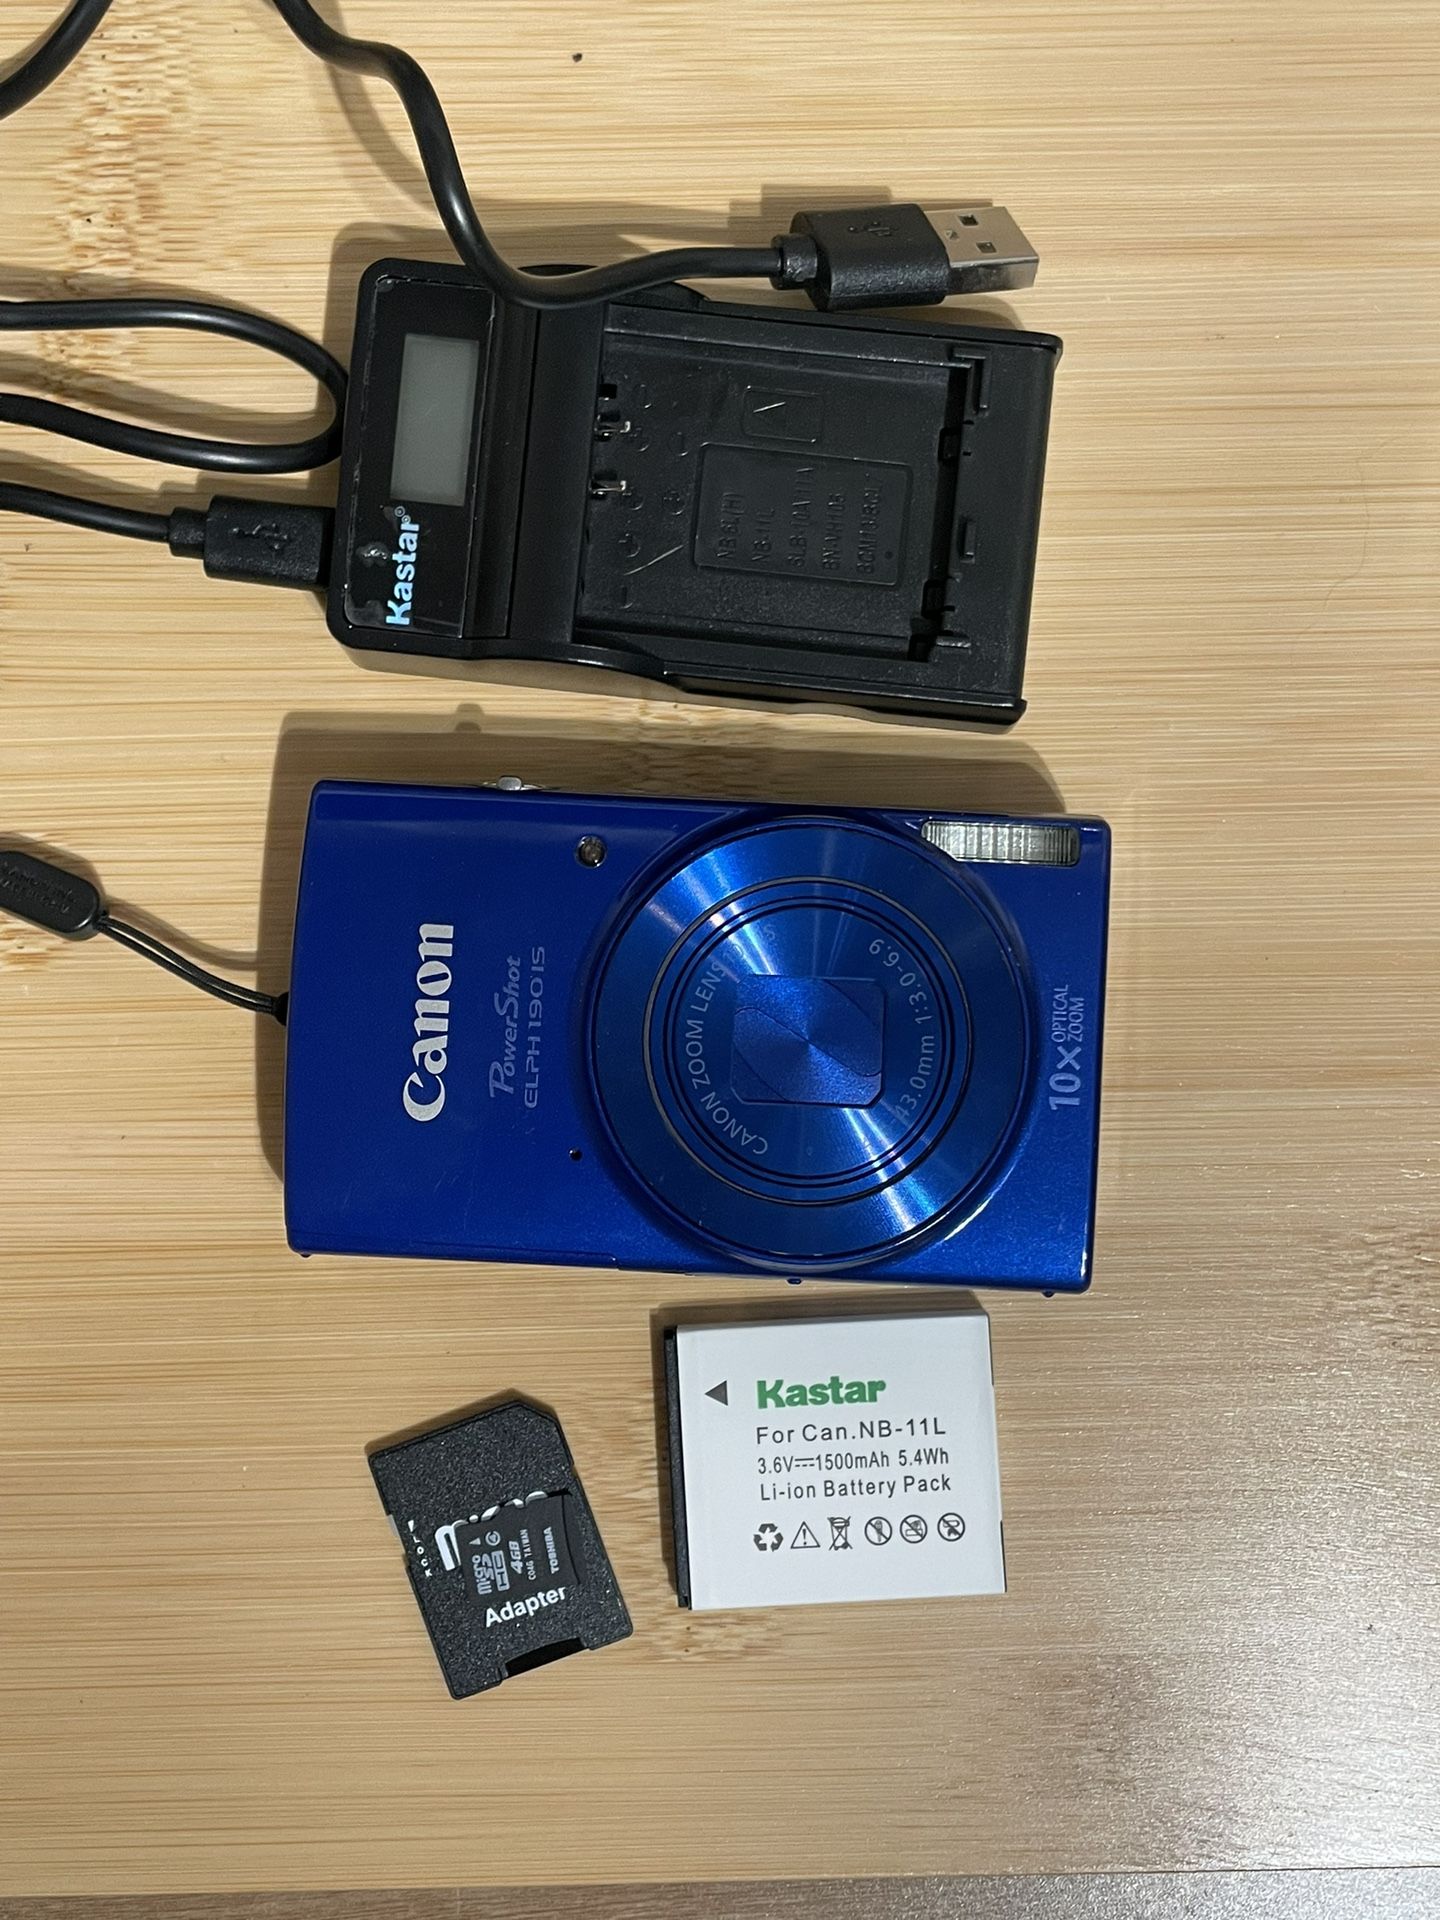 Canon Powershot Elph 190 blue digital camera 20 MP -Tested Works  Flash zoom video photo all works. Charger, battery and 4GB memory card included